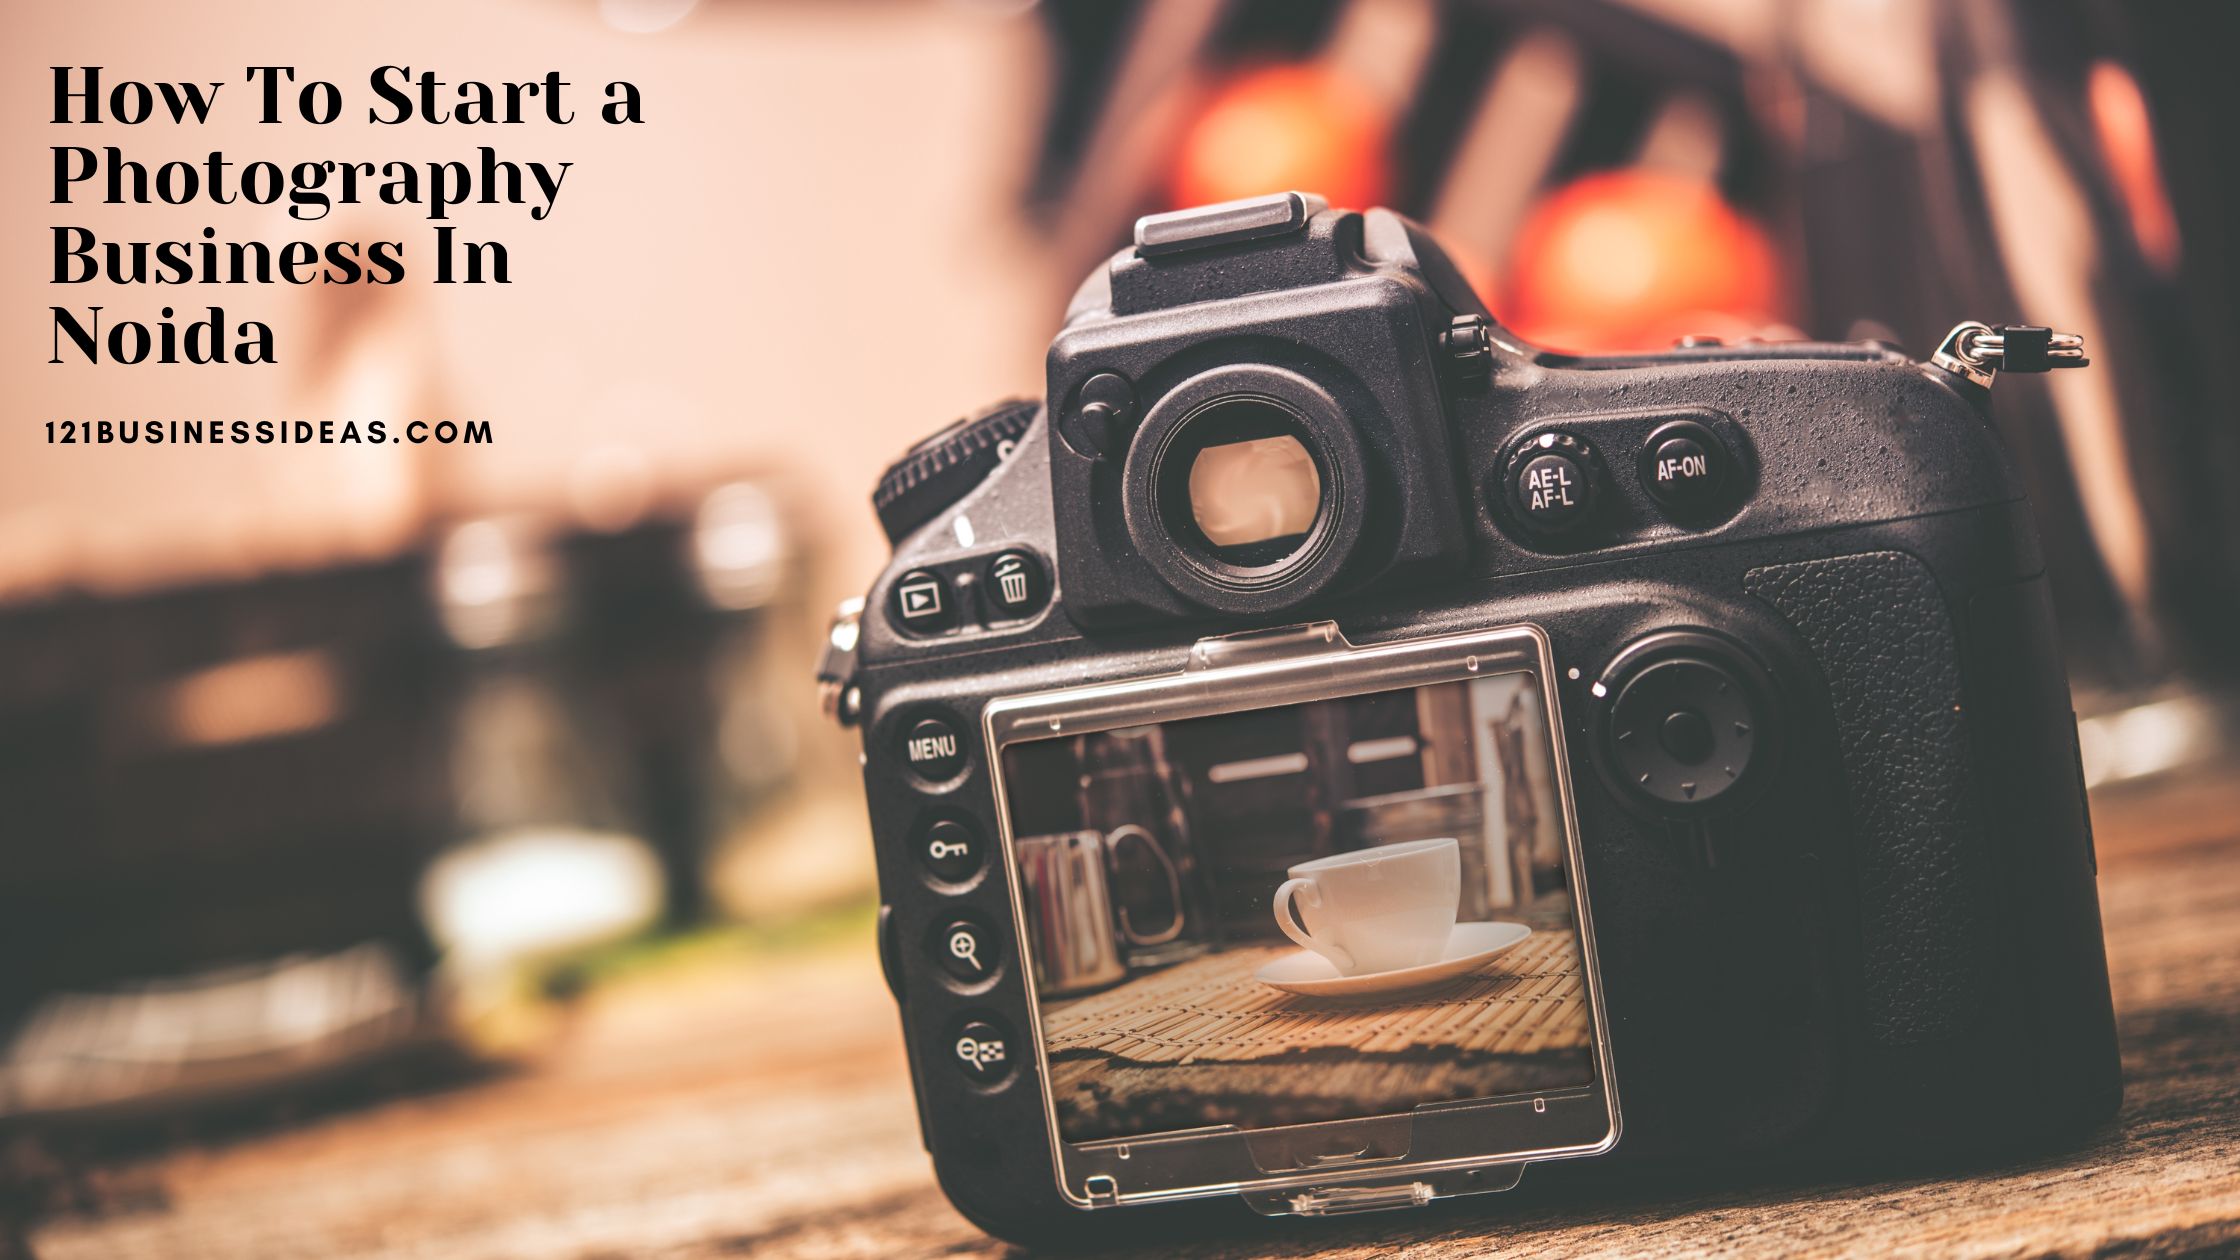 How To Start a Photography Business In Noida